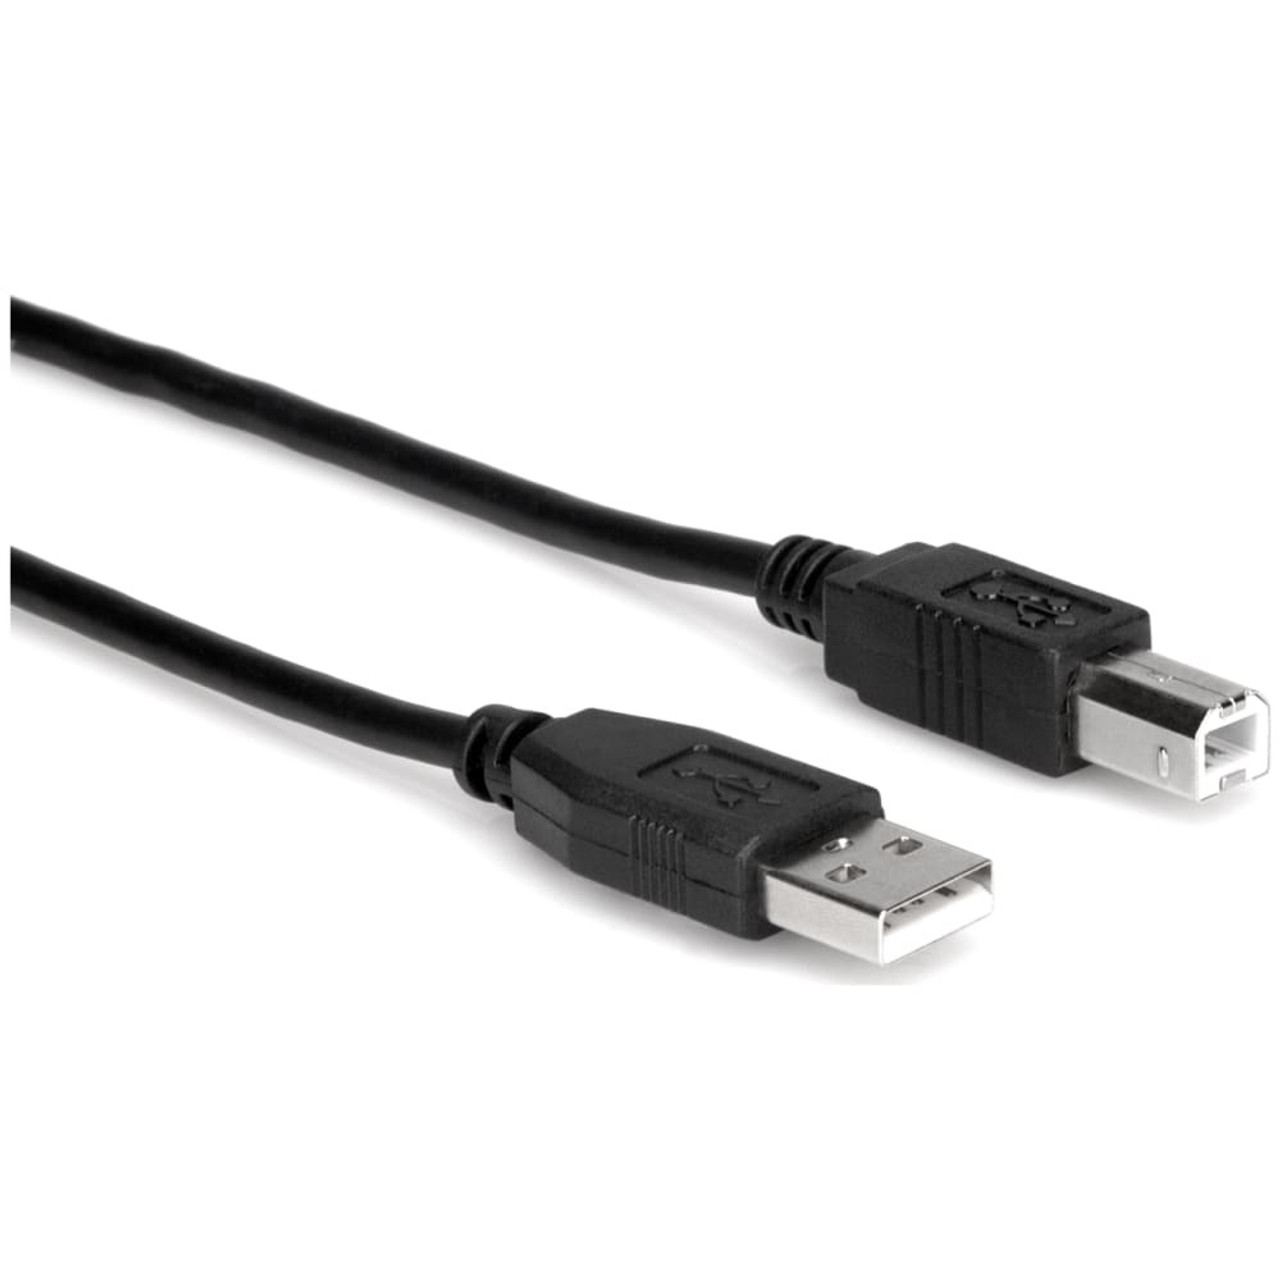 HOSA USB-205AB High Speed USB Cable, Type A to Type B, ft EMI Audio